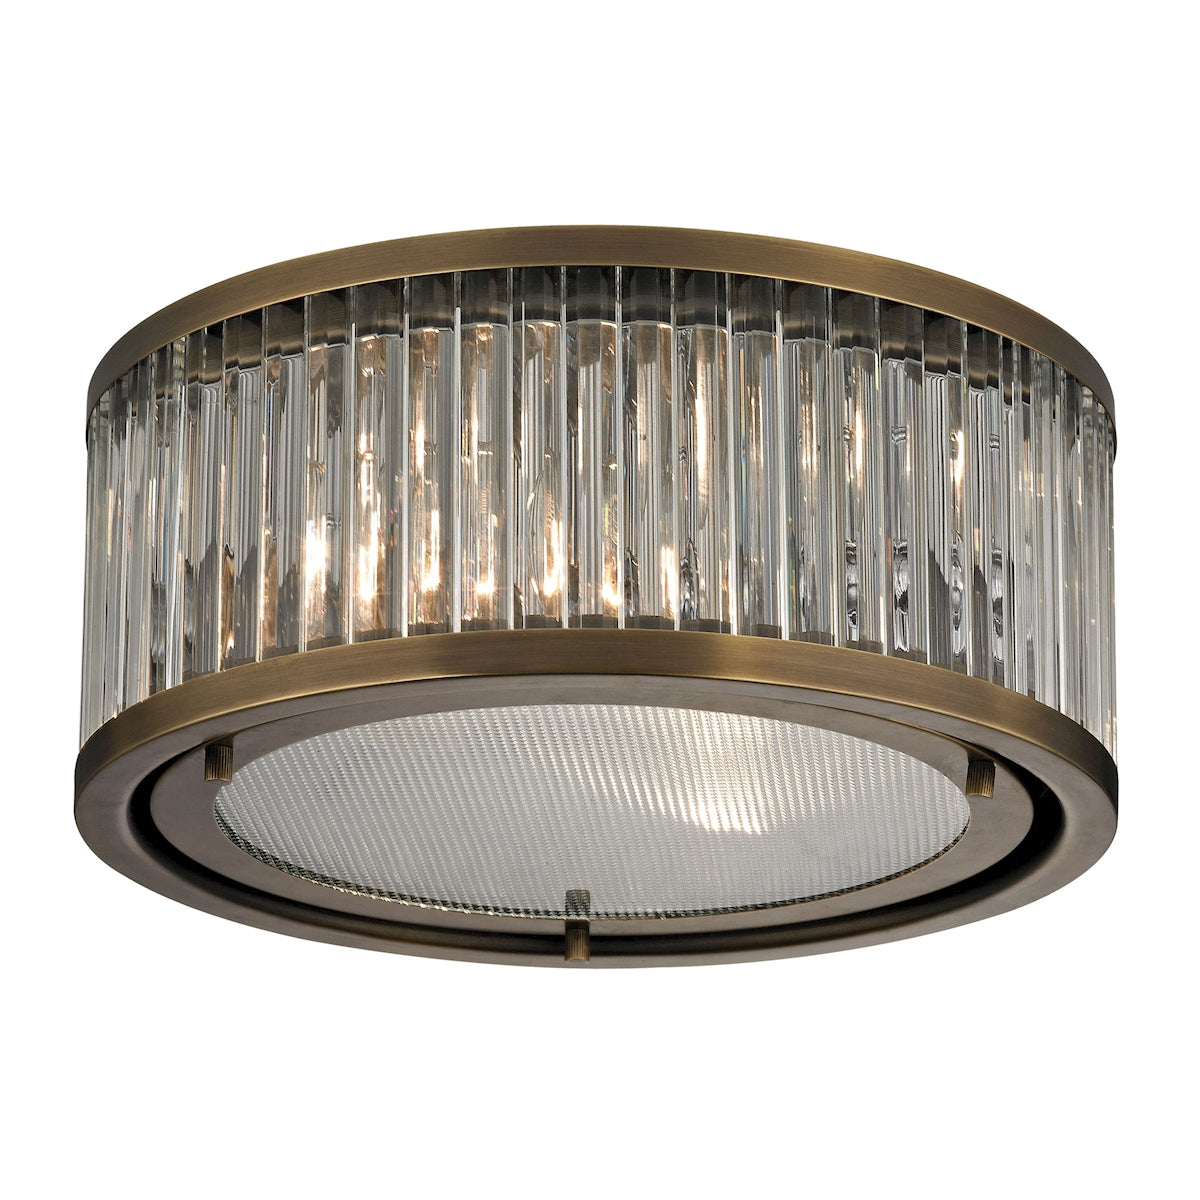 Linden Manor 2-Light Flush Mount in Aged Brass with Diffuser